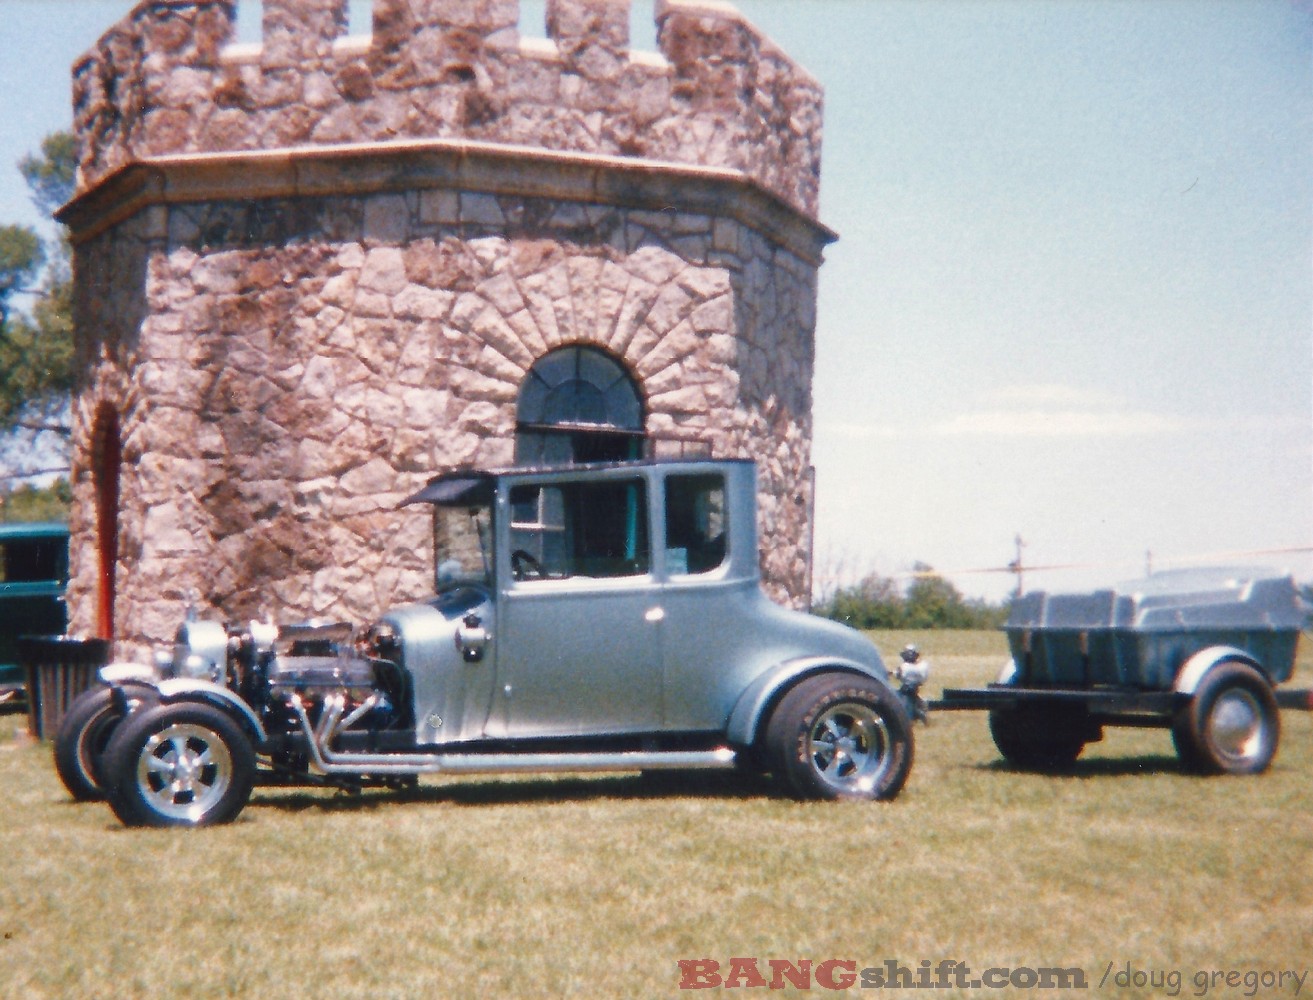 Hop In The Hot Rod Time Machine For Some Sweet 1980s Car Show Coverage! Ponca City, Oklahoma